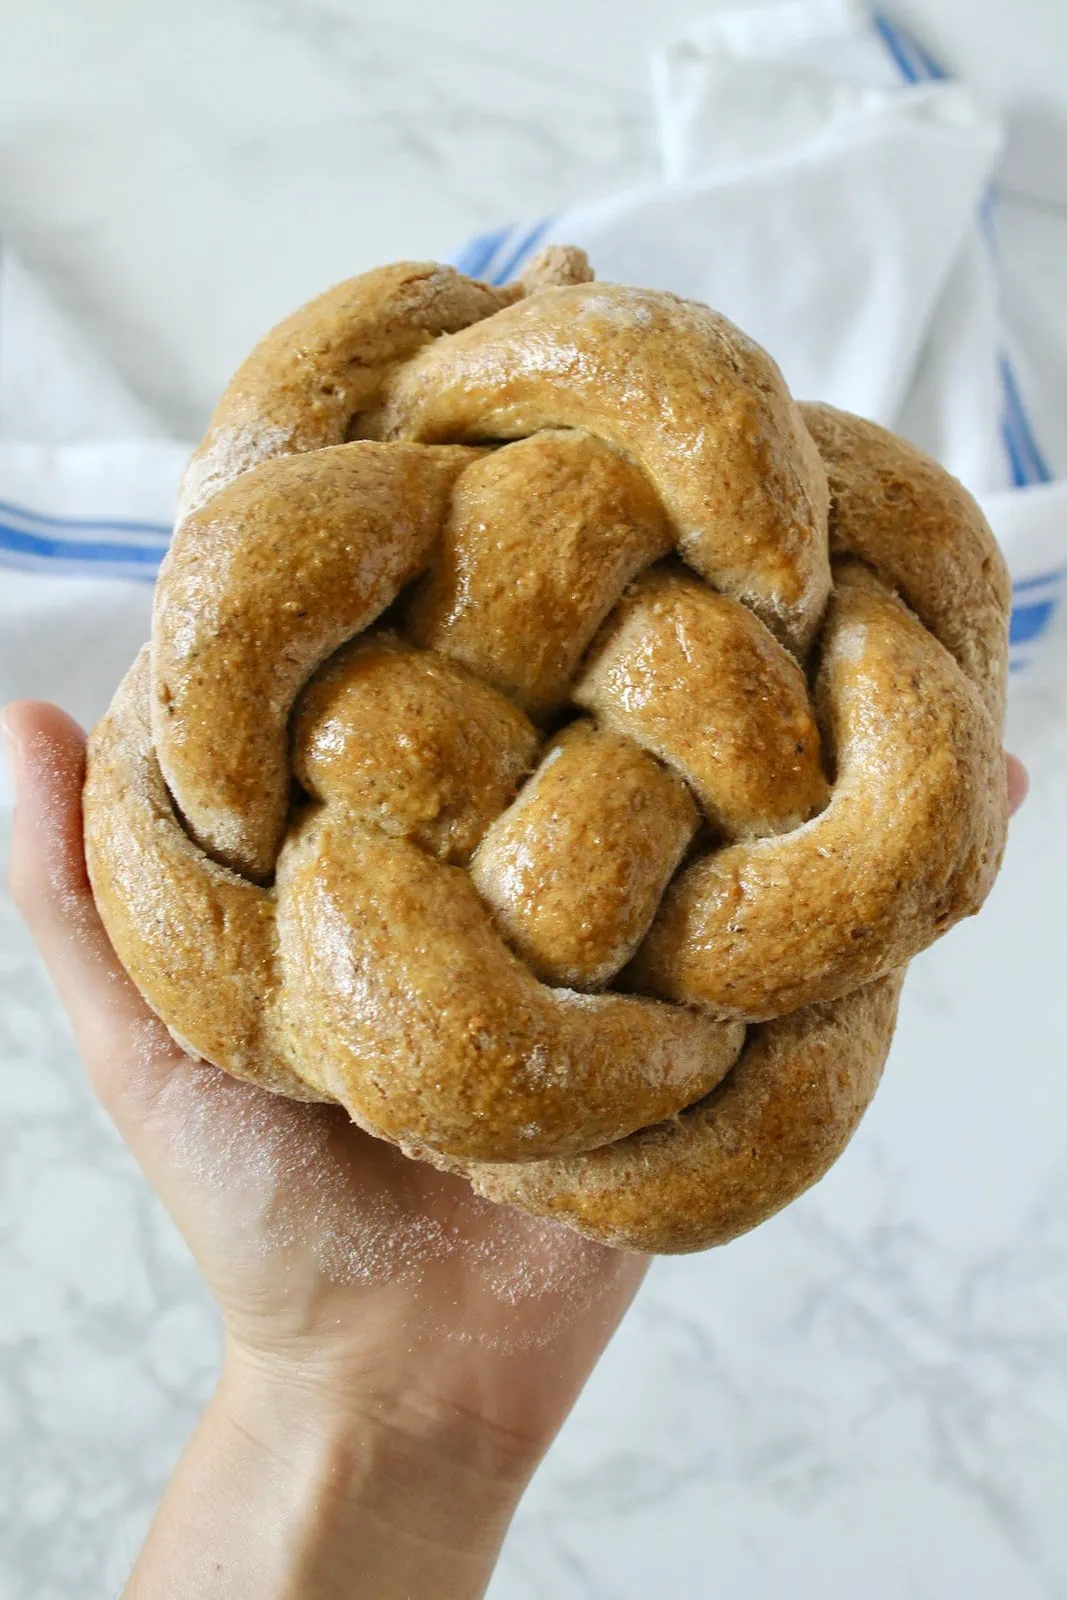 A person is holding a braided gluten free challah bread.